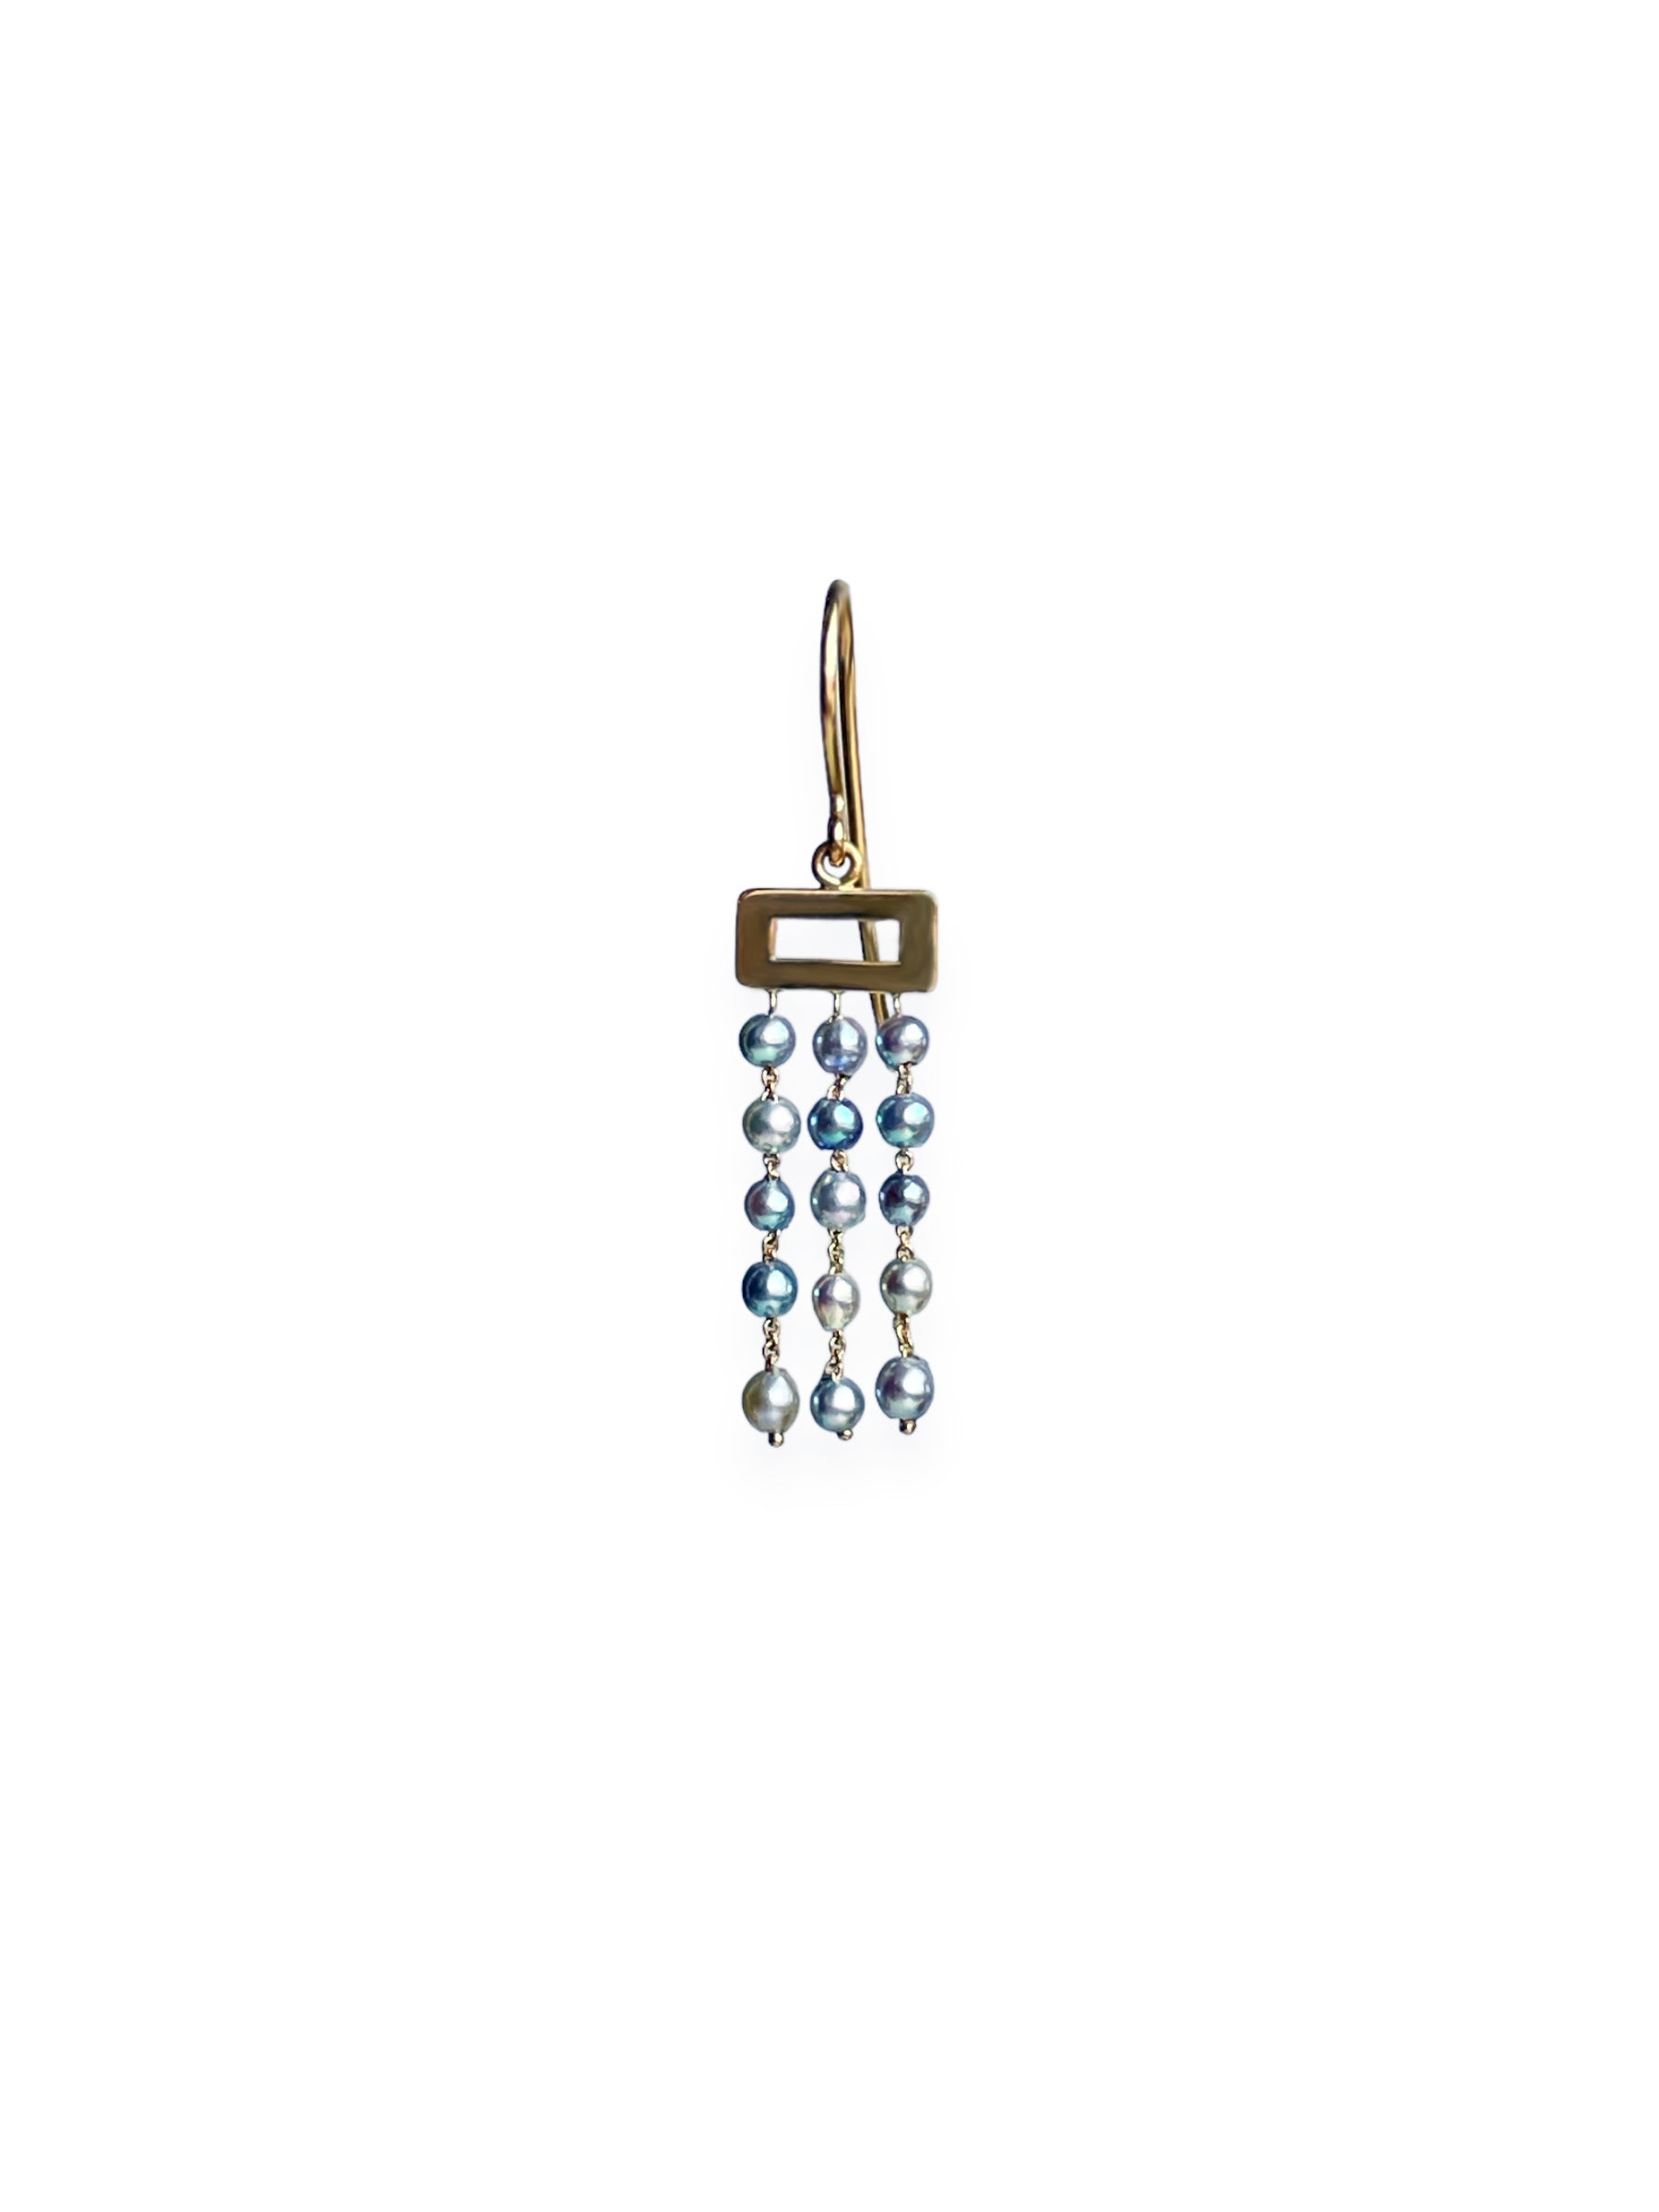 Shower - Earring with small Akoya pearls (limited edition)